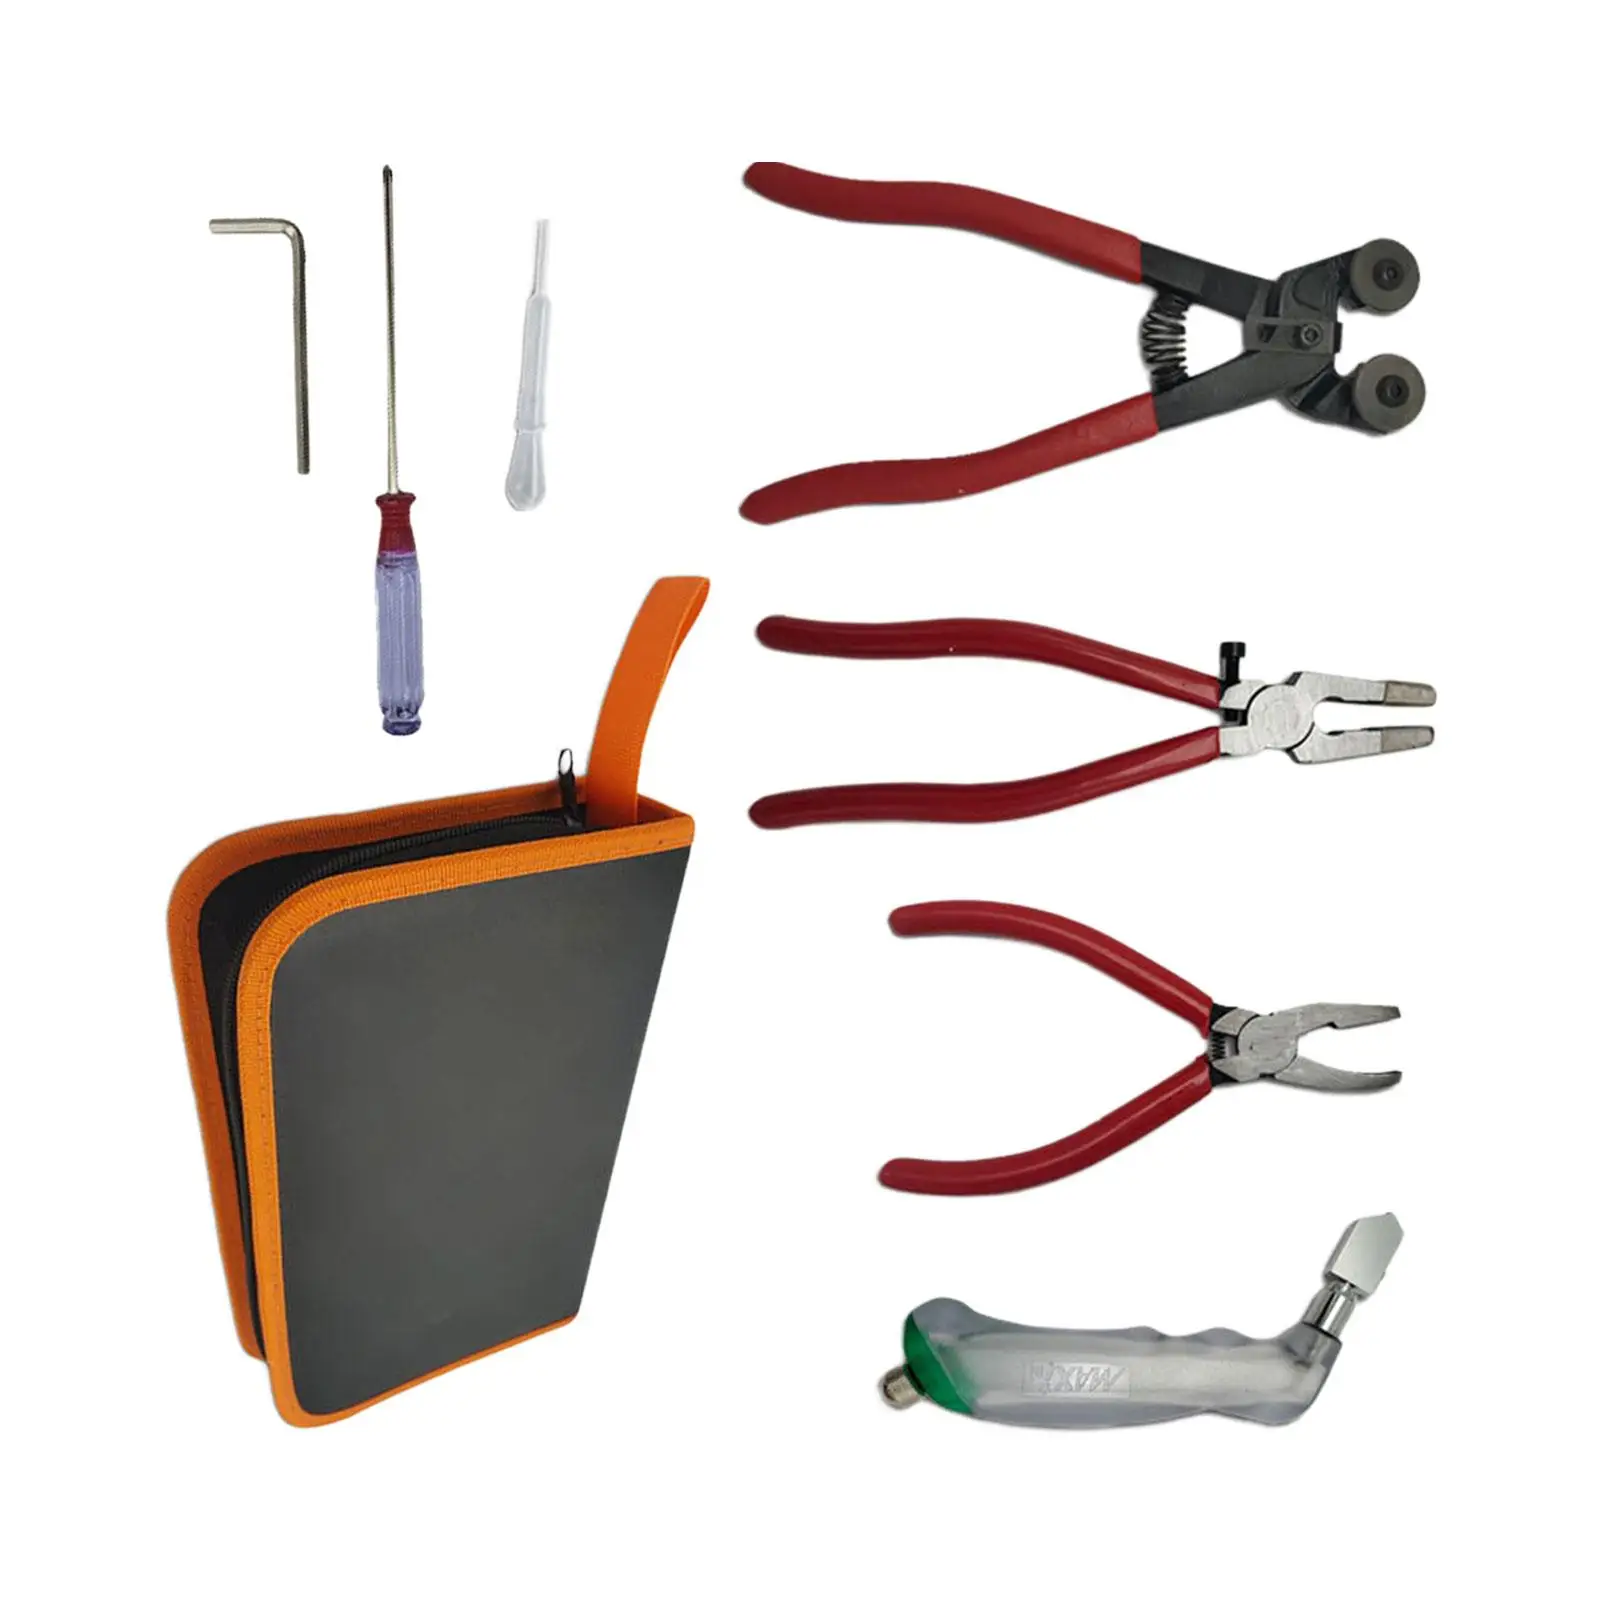 Glass Cutting Tool Set Glass Running Pliers Breaking Pliers Oil Dropper Storage Bag for Mosaic Tiles Mirrors Stained Glass